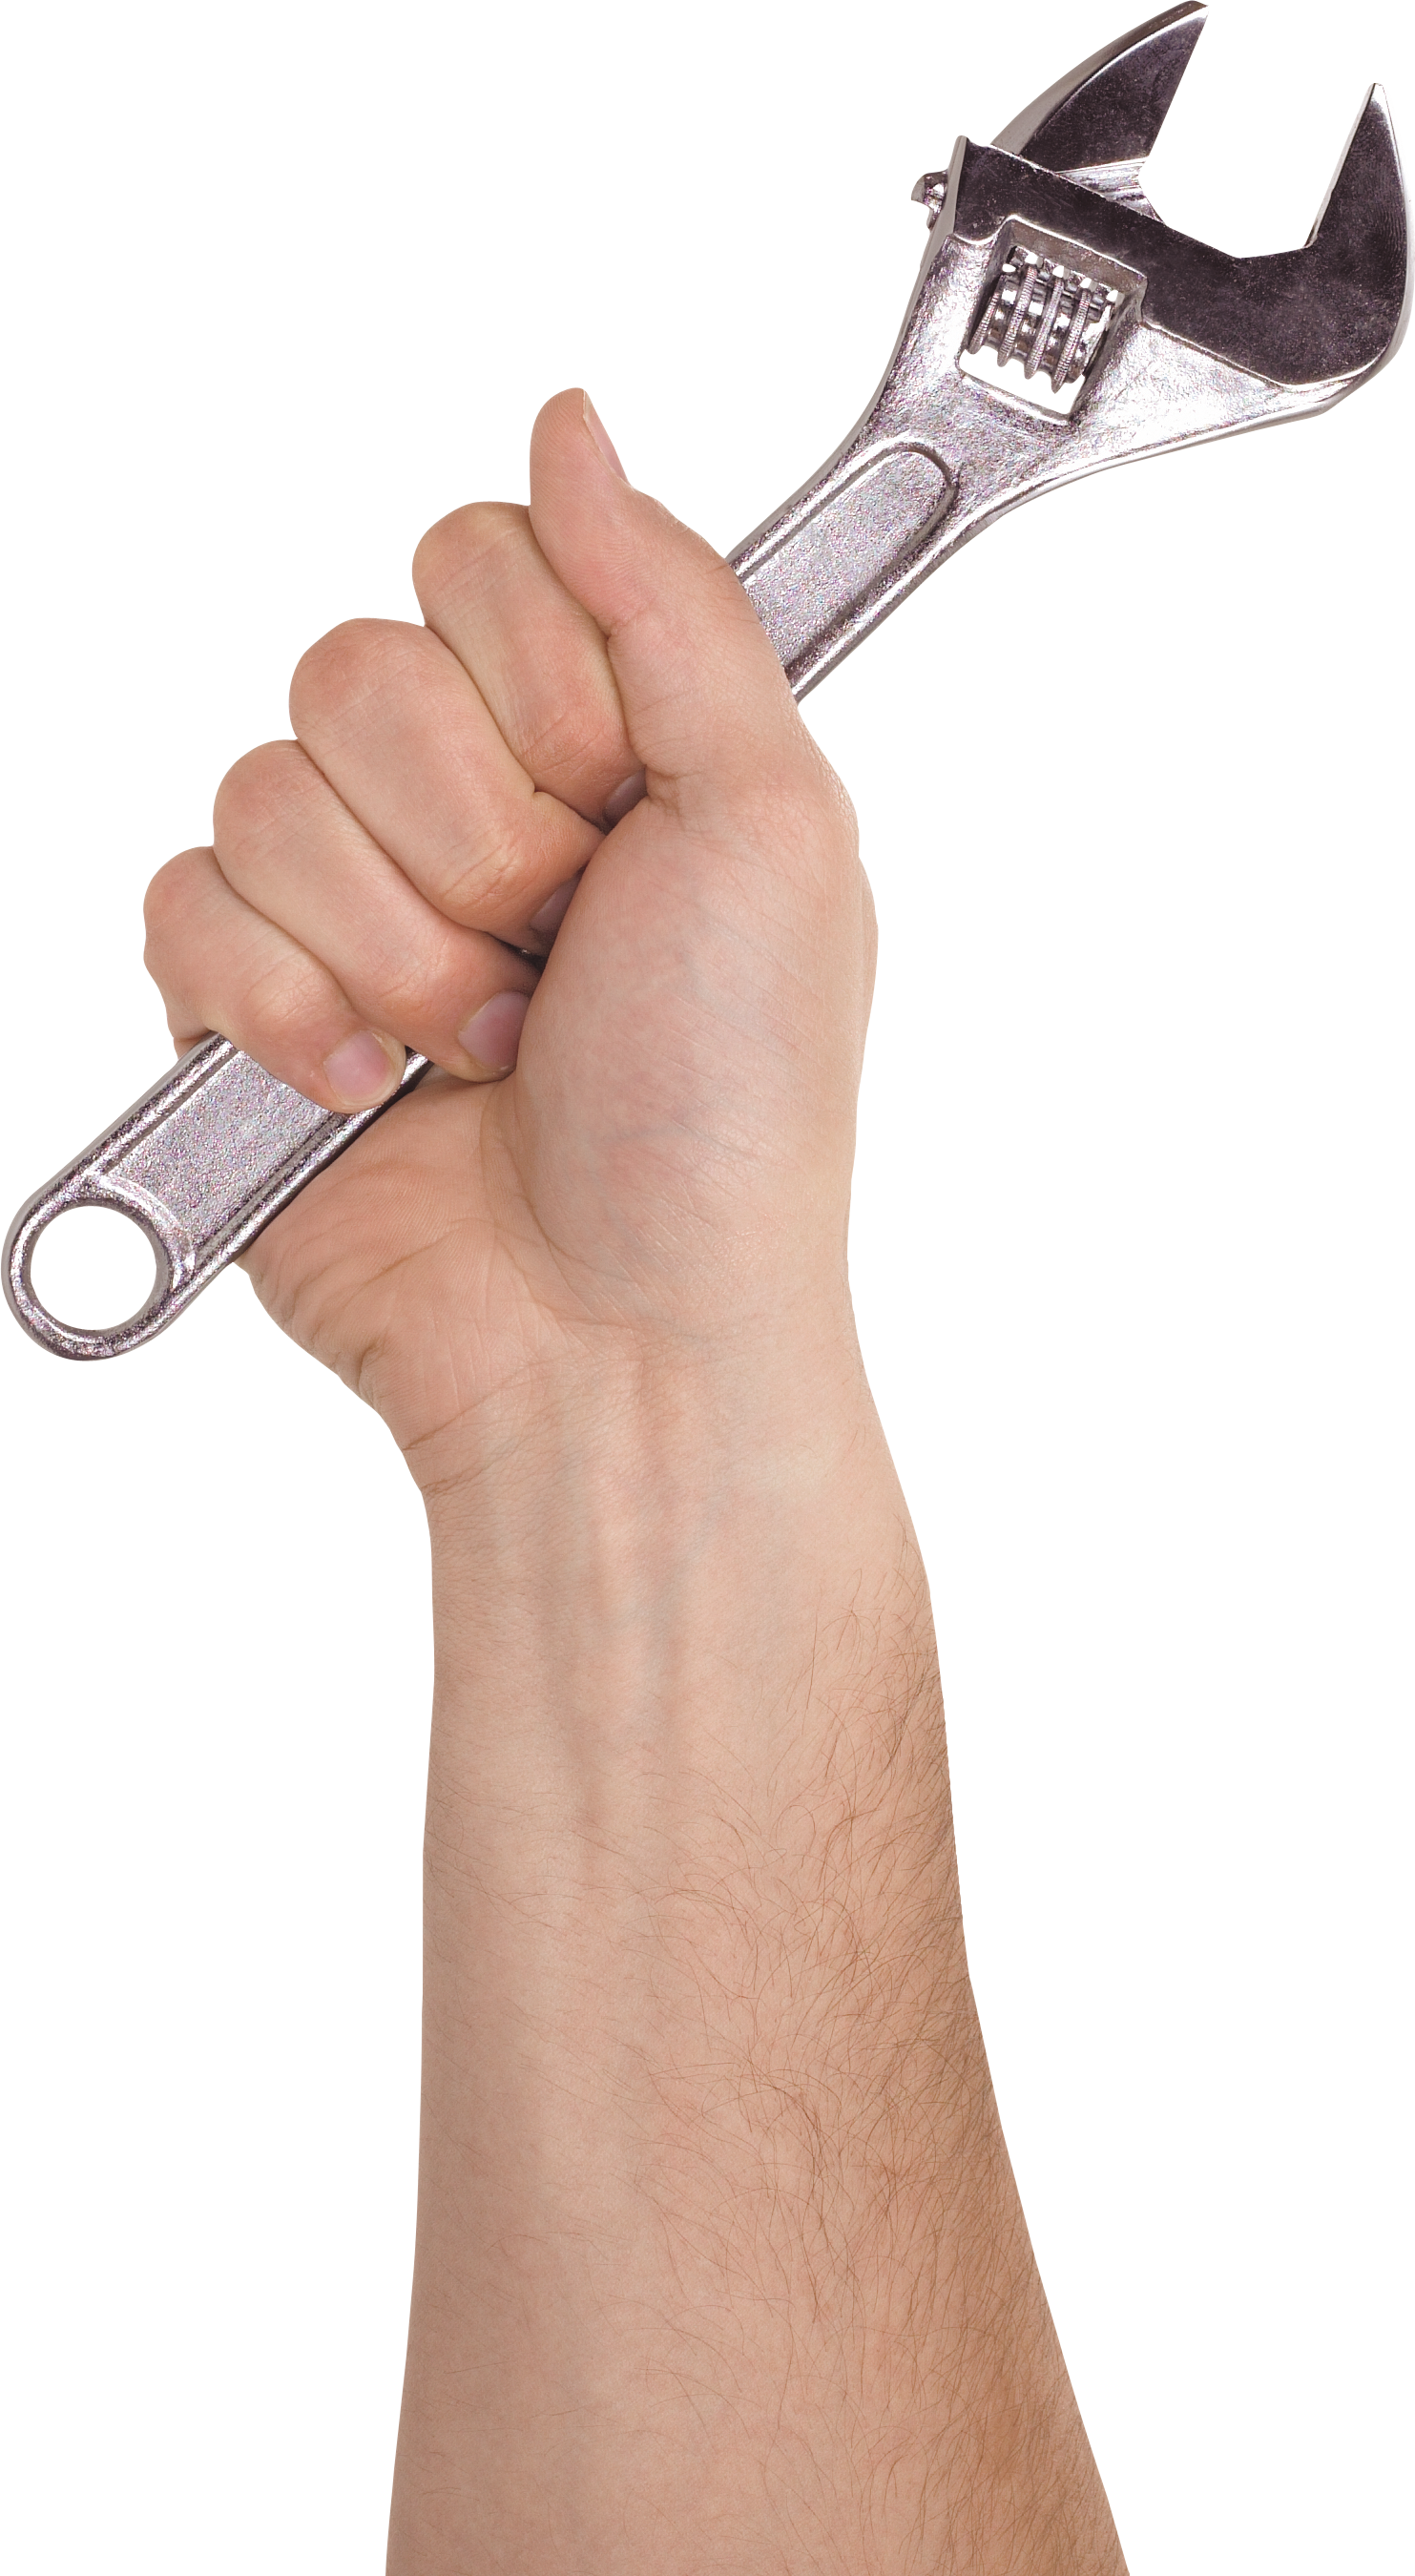 Nail clipart metal object. Hand holding wrench one